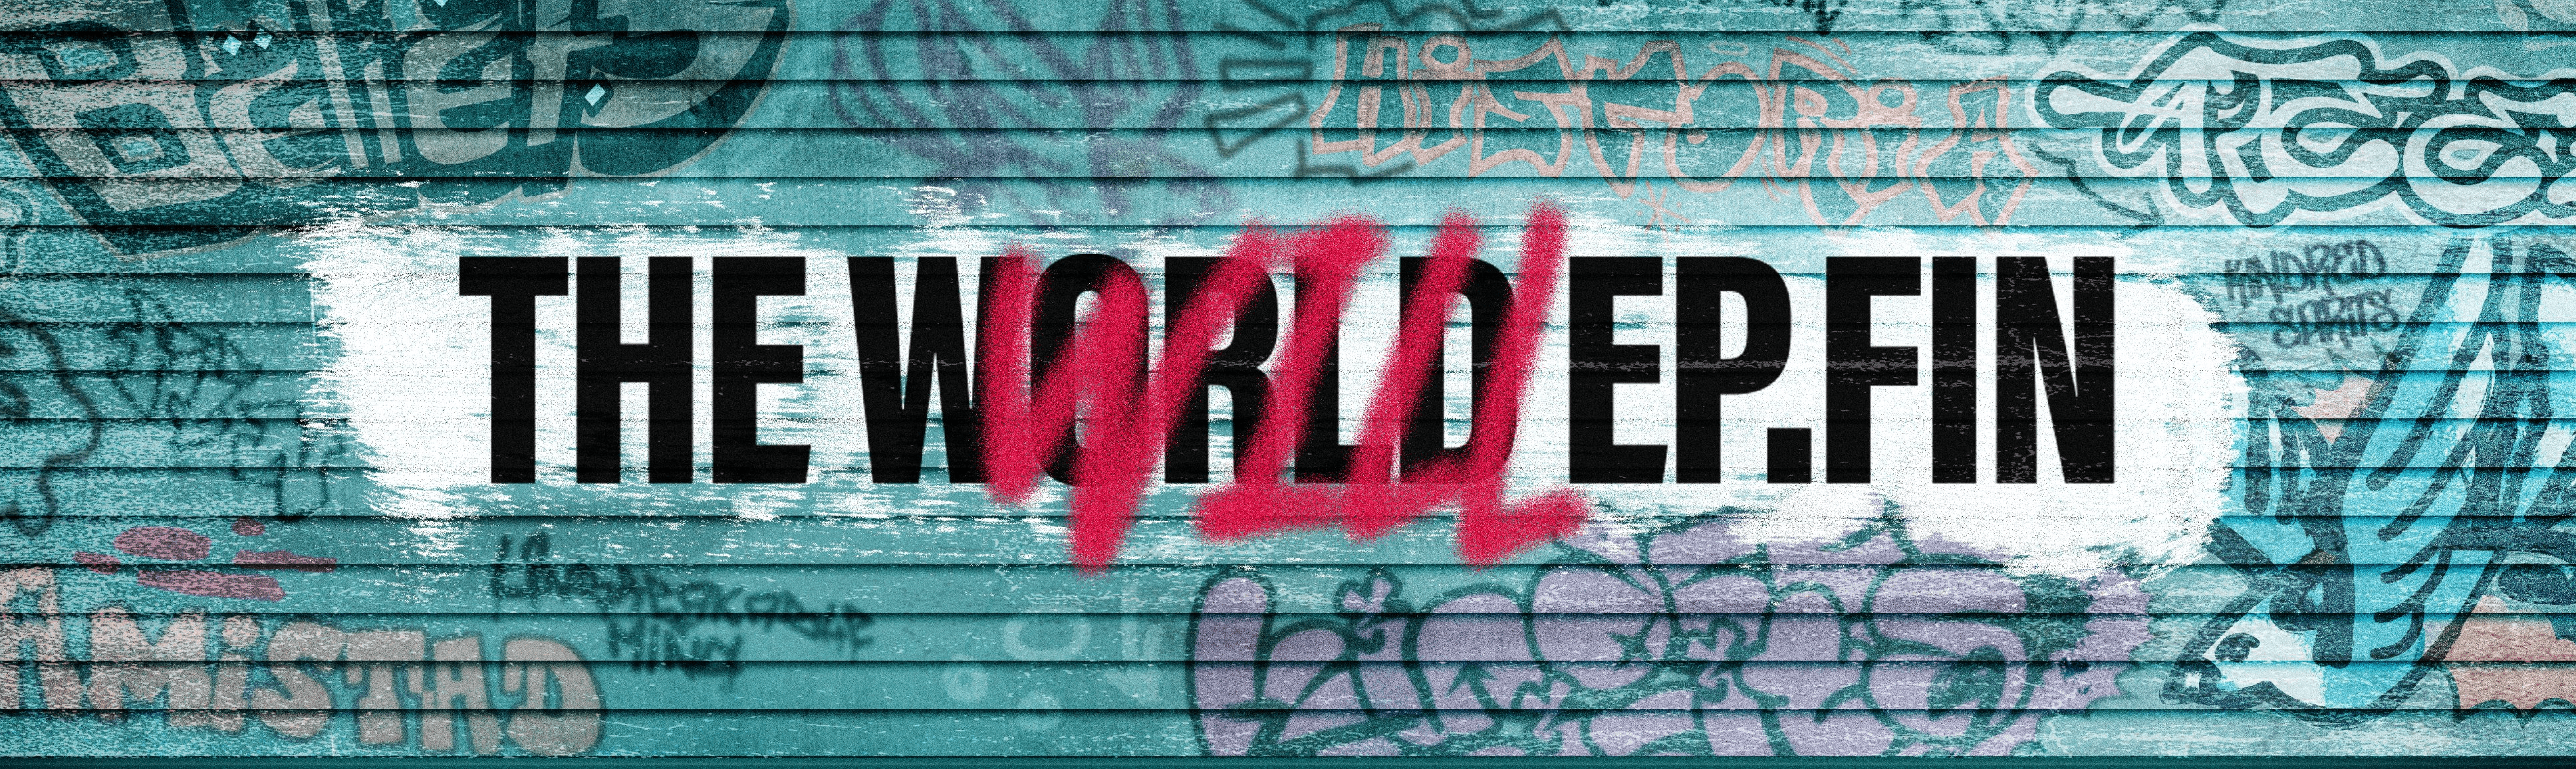 ATEEZ - THE WORLD EP.FI : WILL - Teaser Image